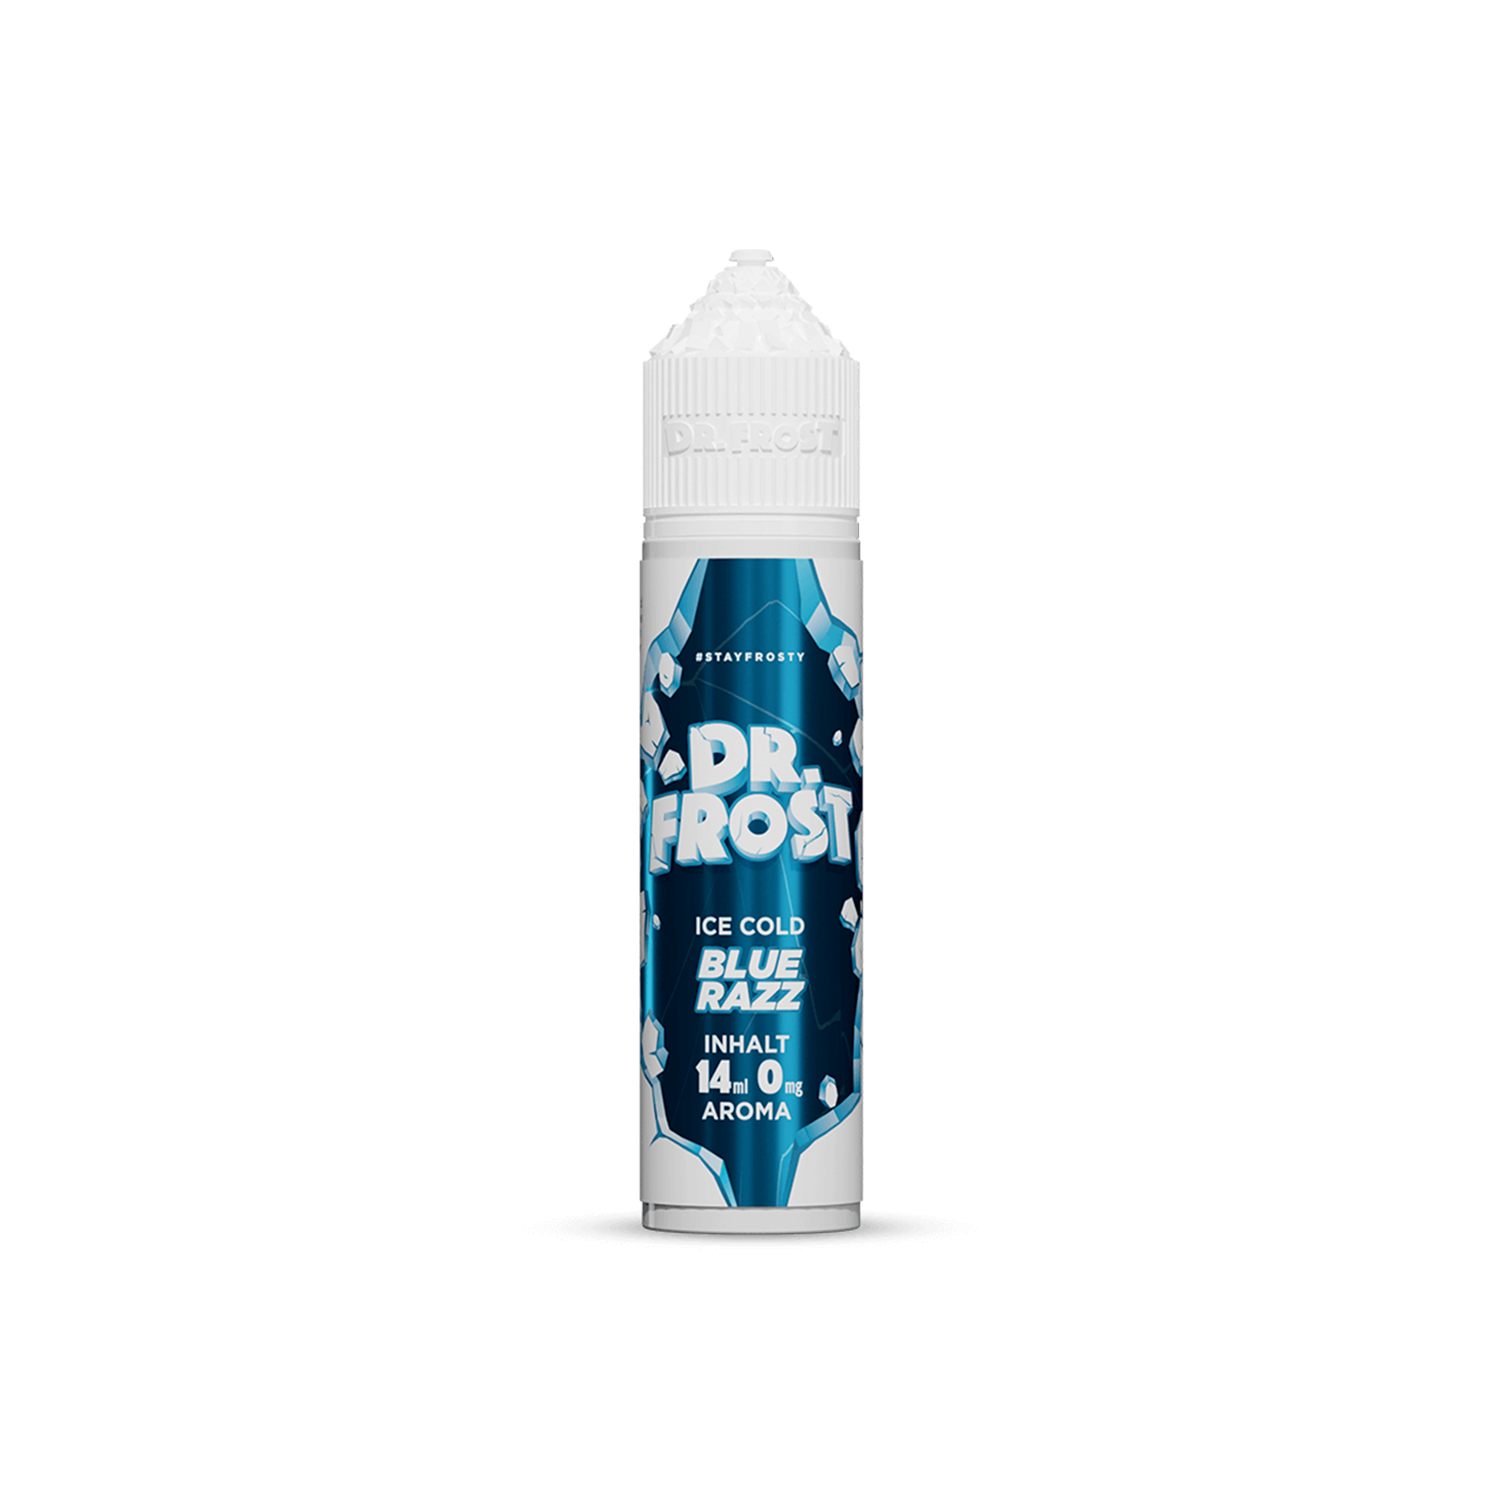 Dr. Frost - Ice Cold - Blue Razz 14ml Aroma 